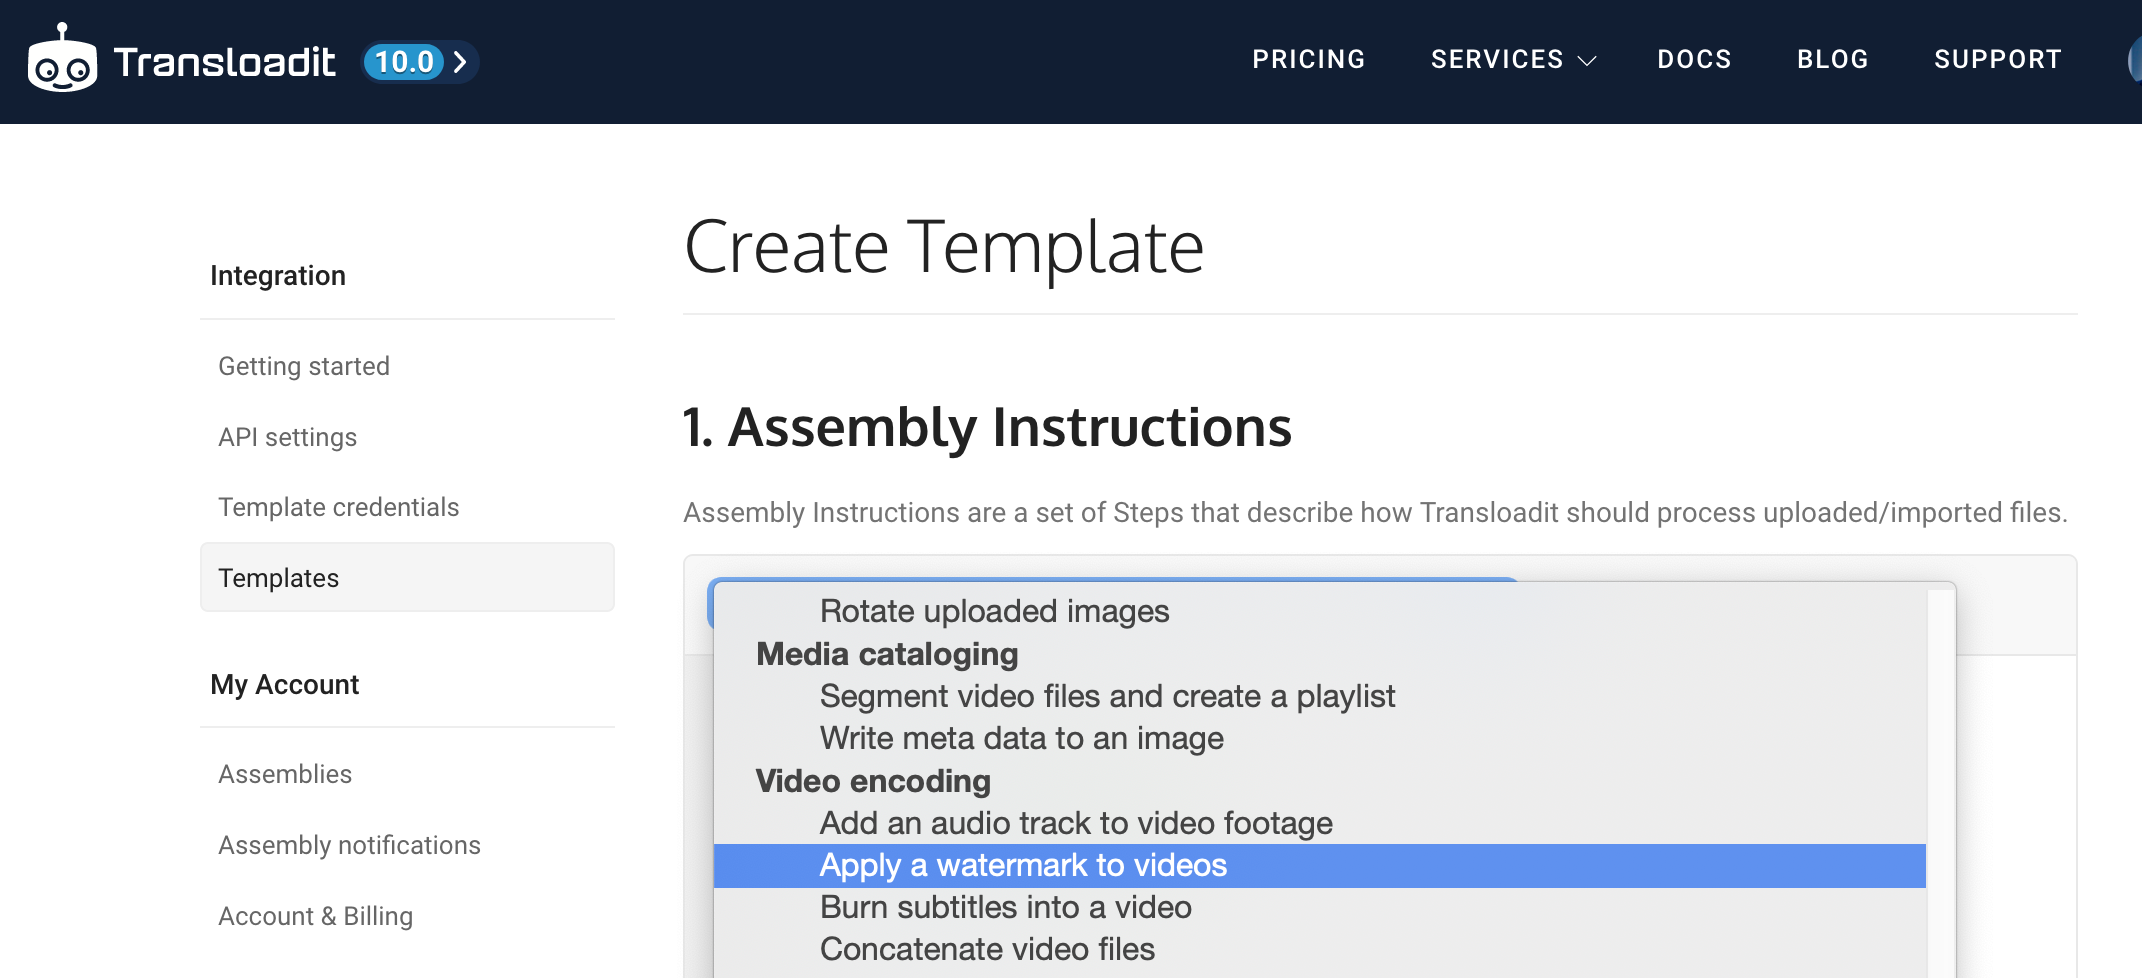 Creating a new Transloadit Template from the 'Apply a watermark to videos' demo